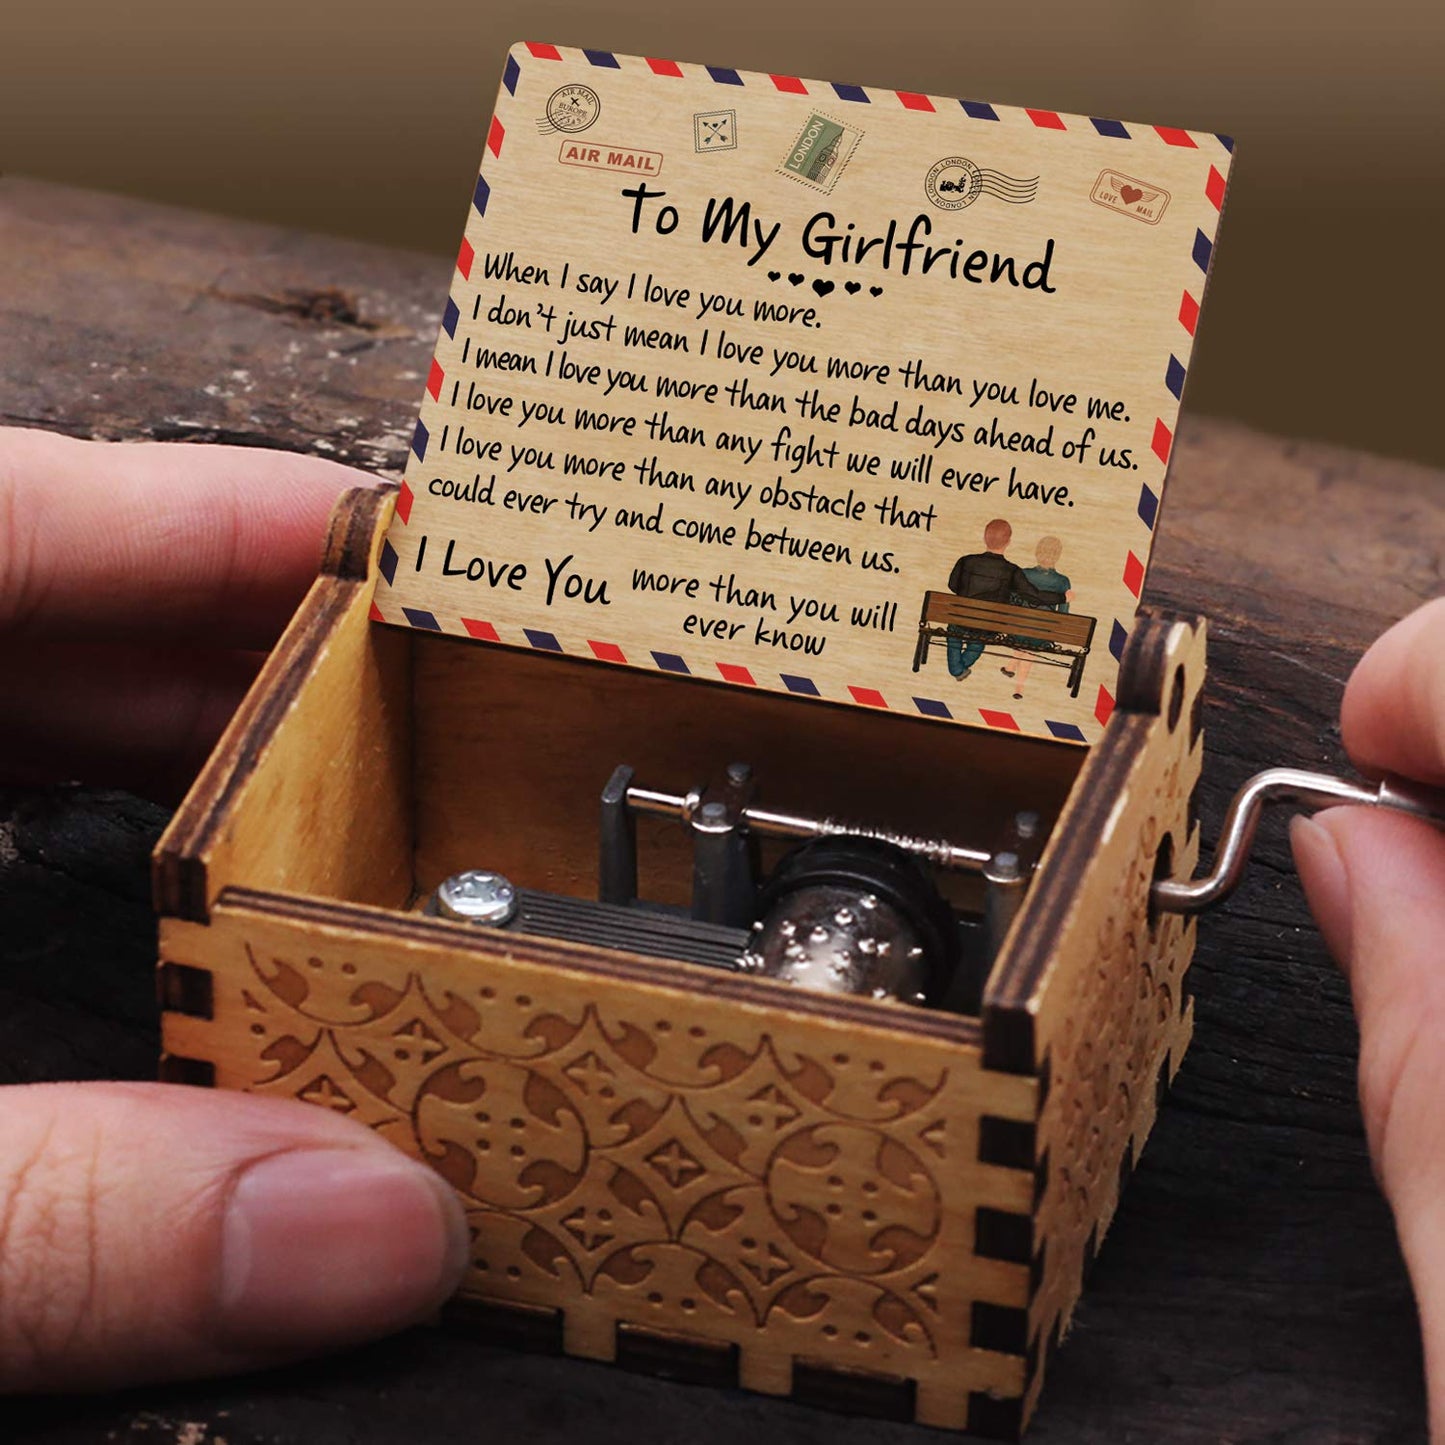 To My Girlfriend-I love you more then the bad days ahend of us-Music Box